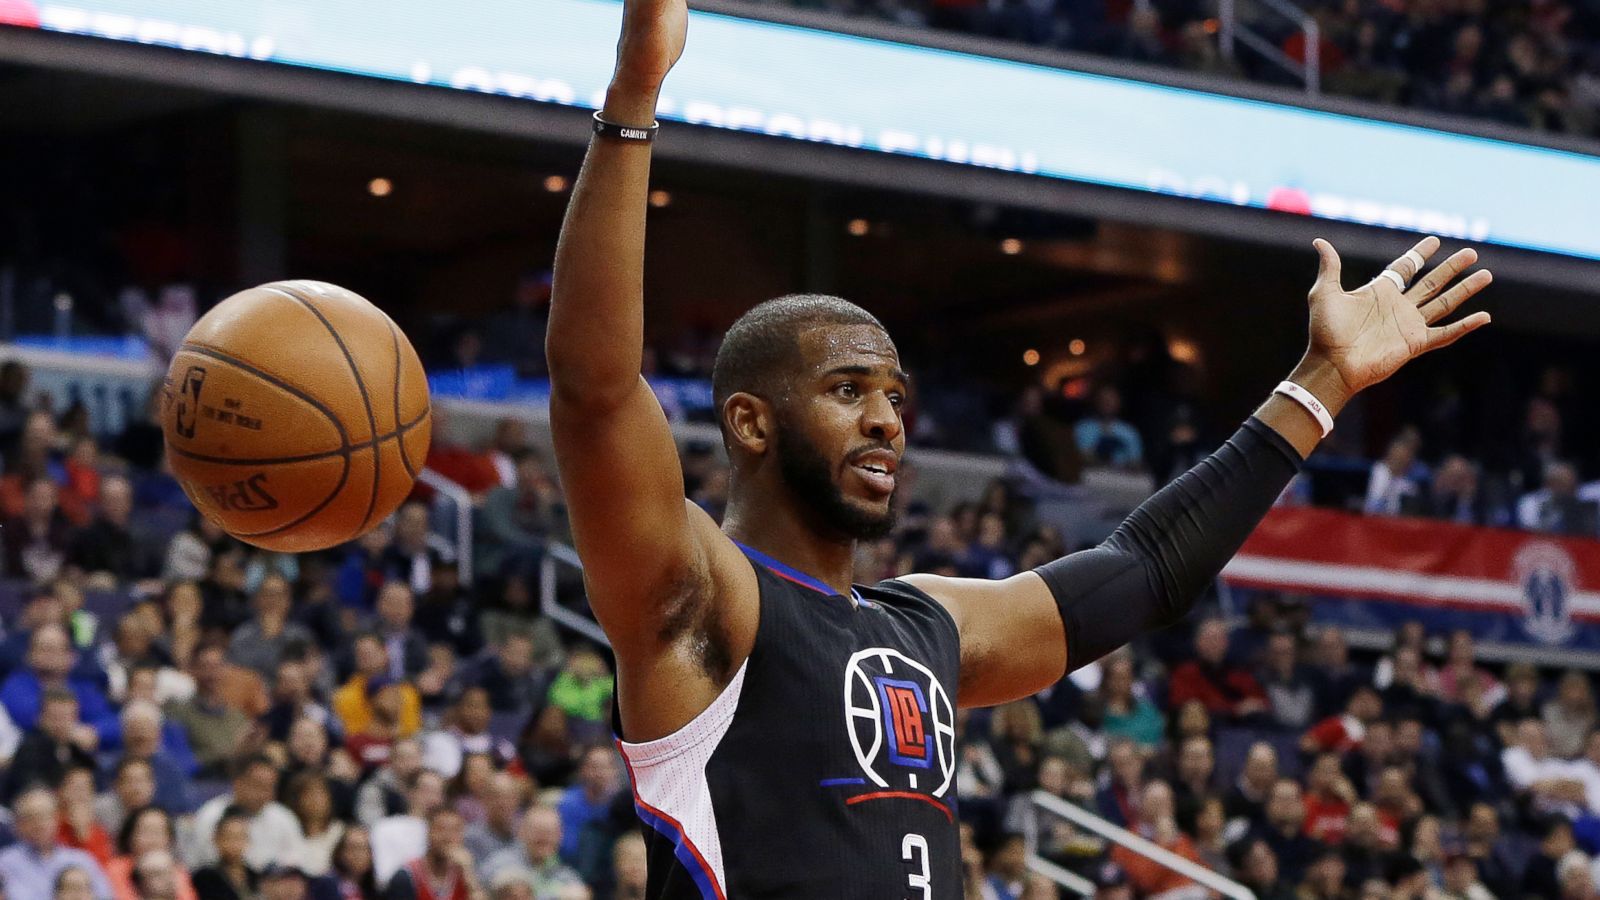 Chris Paul Throws Down Two Dunks In Clippers Win